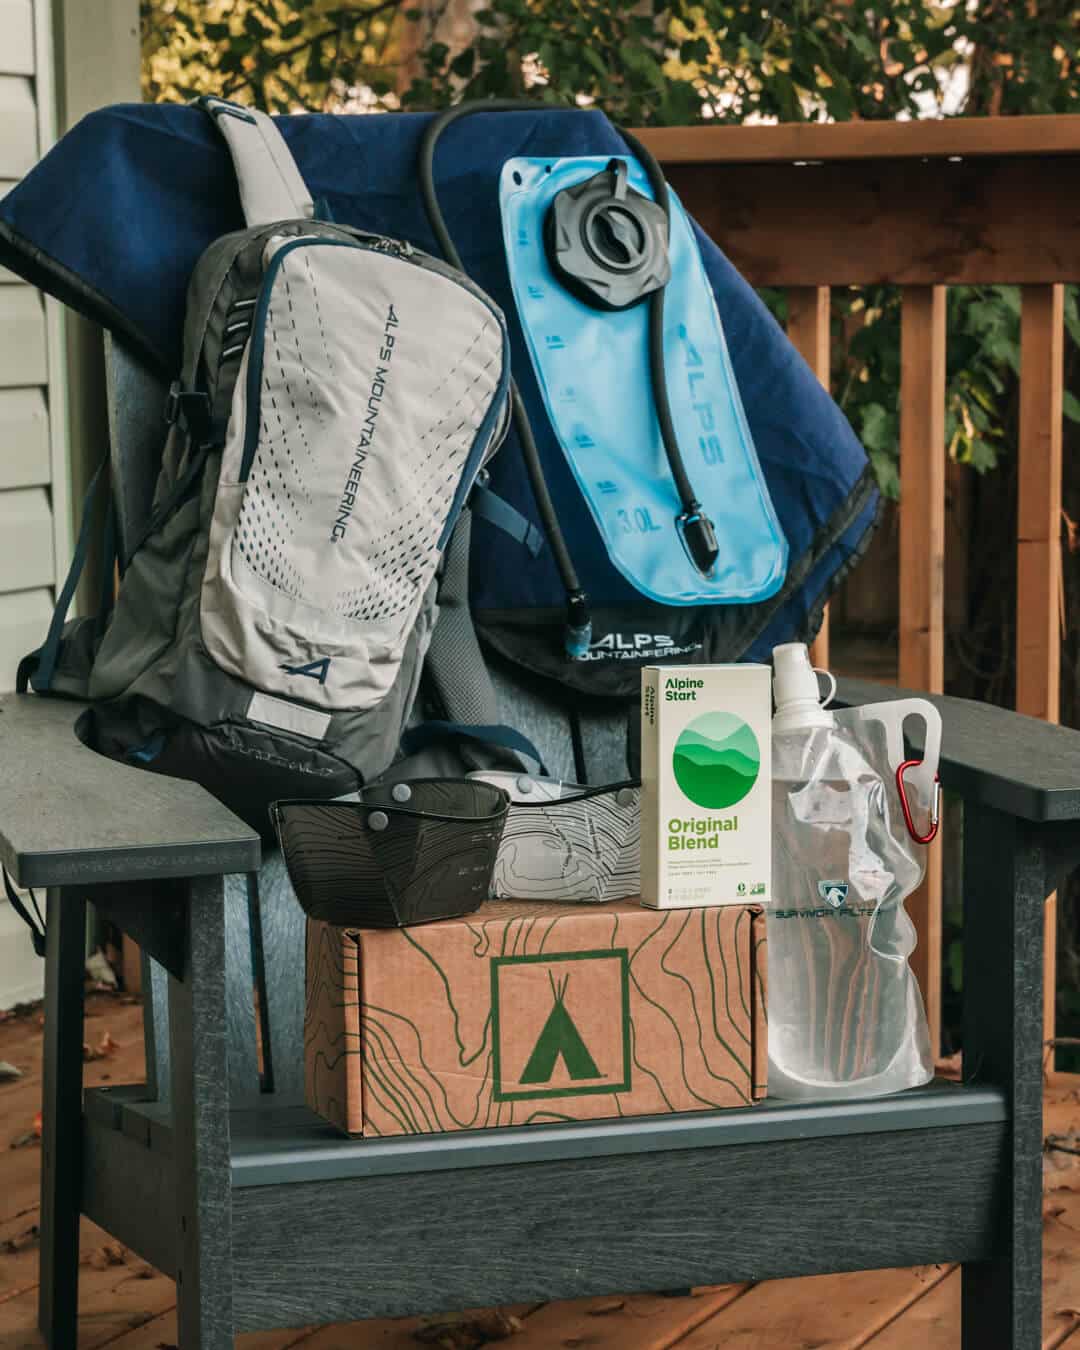 The nomadik quarterly subscription box for camping and outdoors.